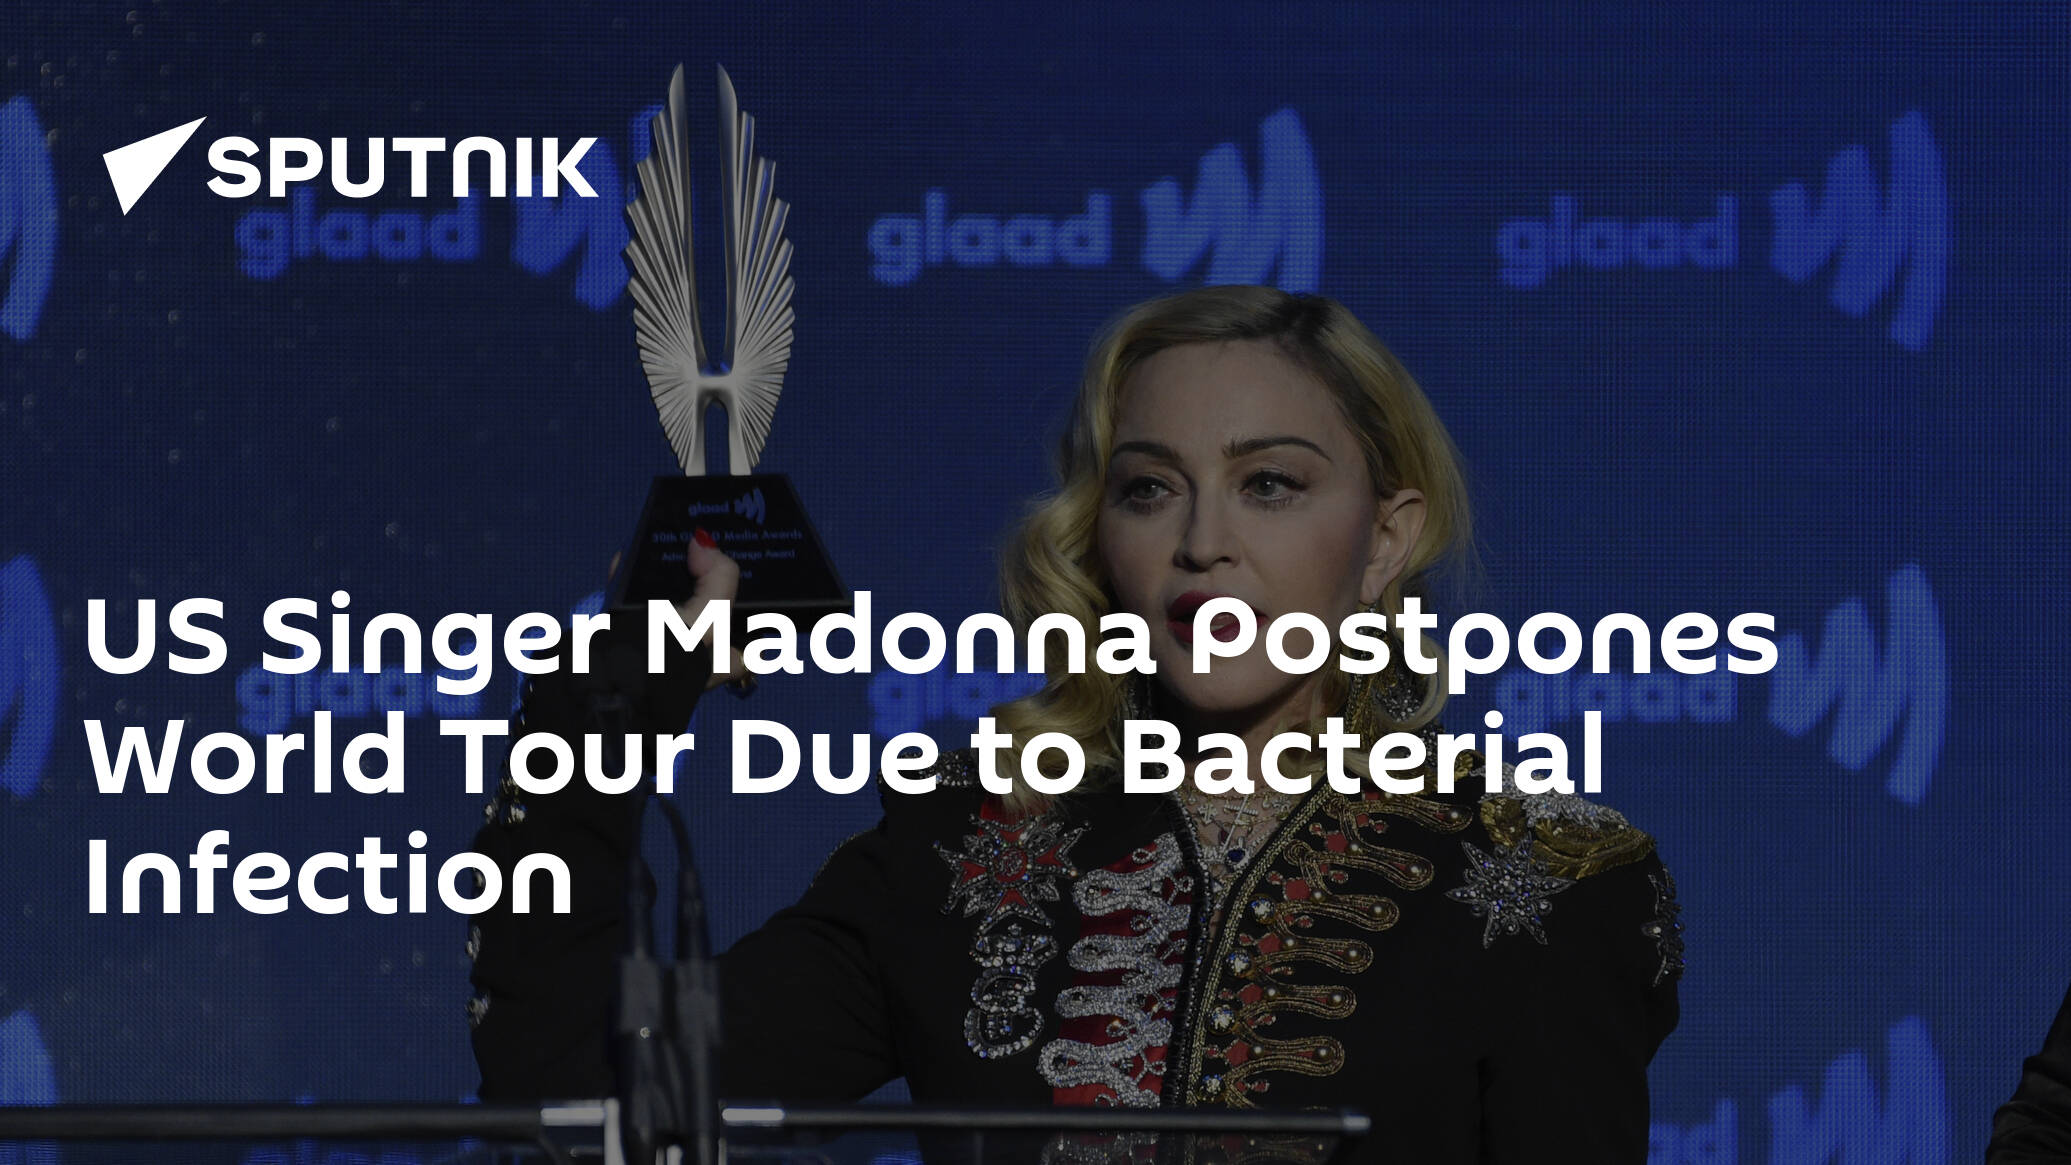 US Singer Madonna Postpones World Tour Due to Bacterial Infection